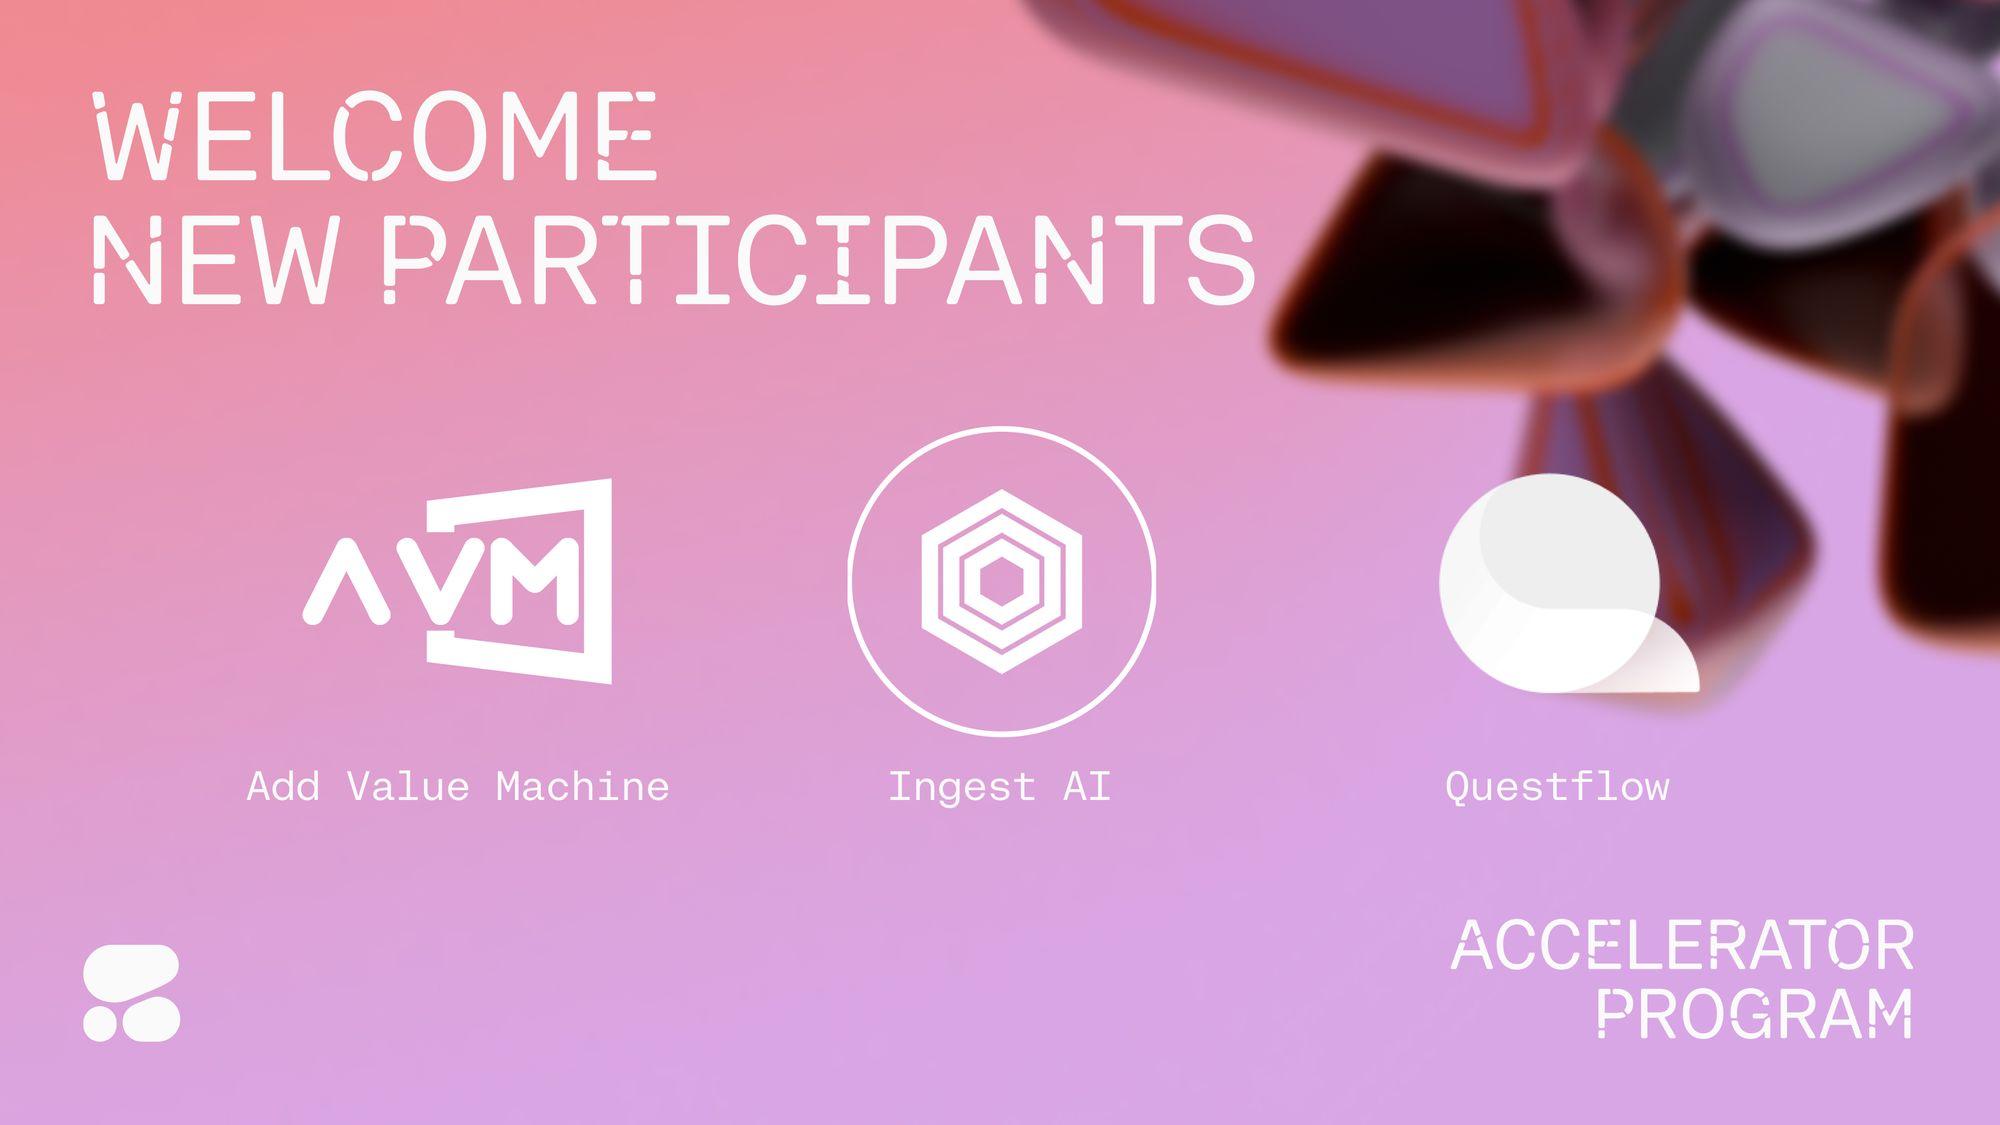 Cohere’s Accelerator Program Welcomes New Participants!